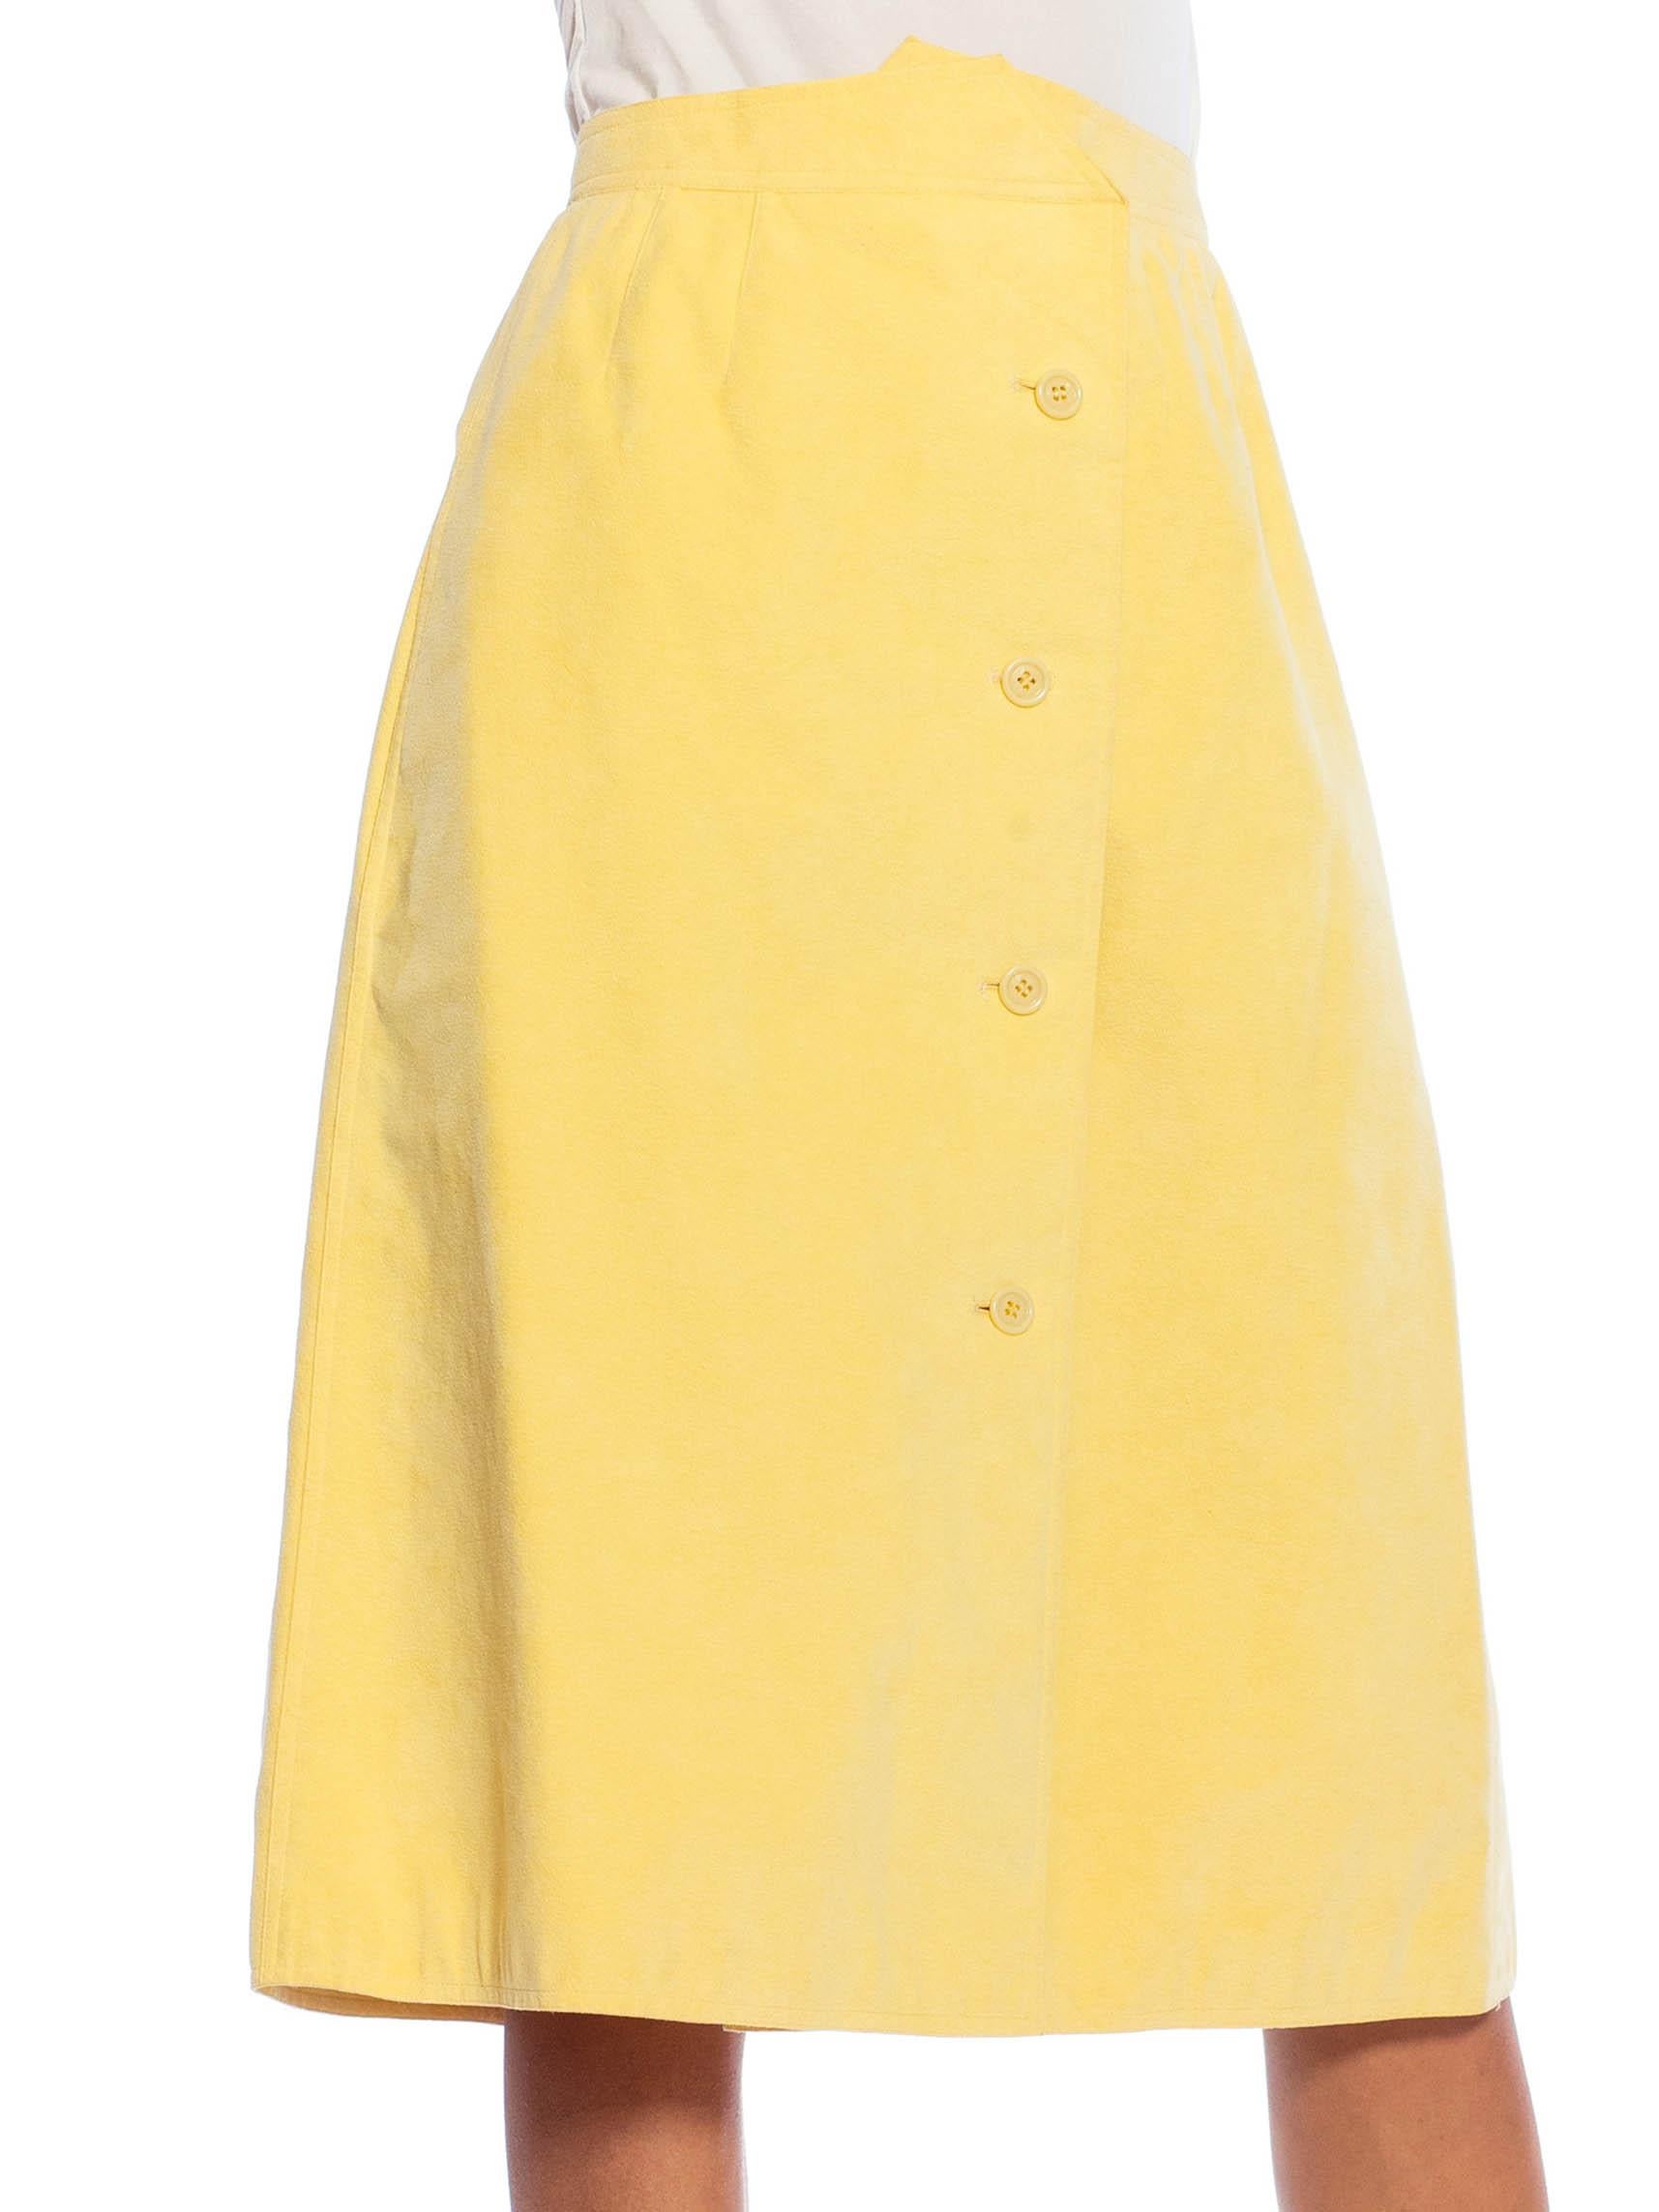 1970S HALSTON Butter Yellow Poly Blend Ultrasuede Skirt With Pockets 1